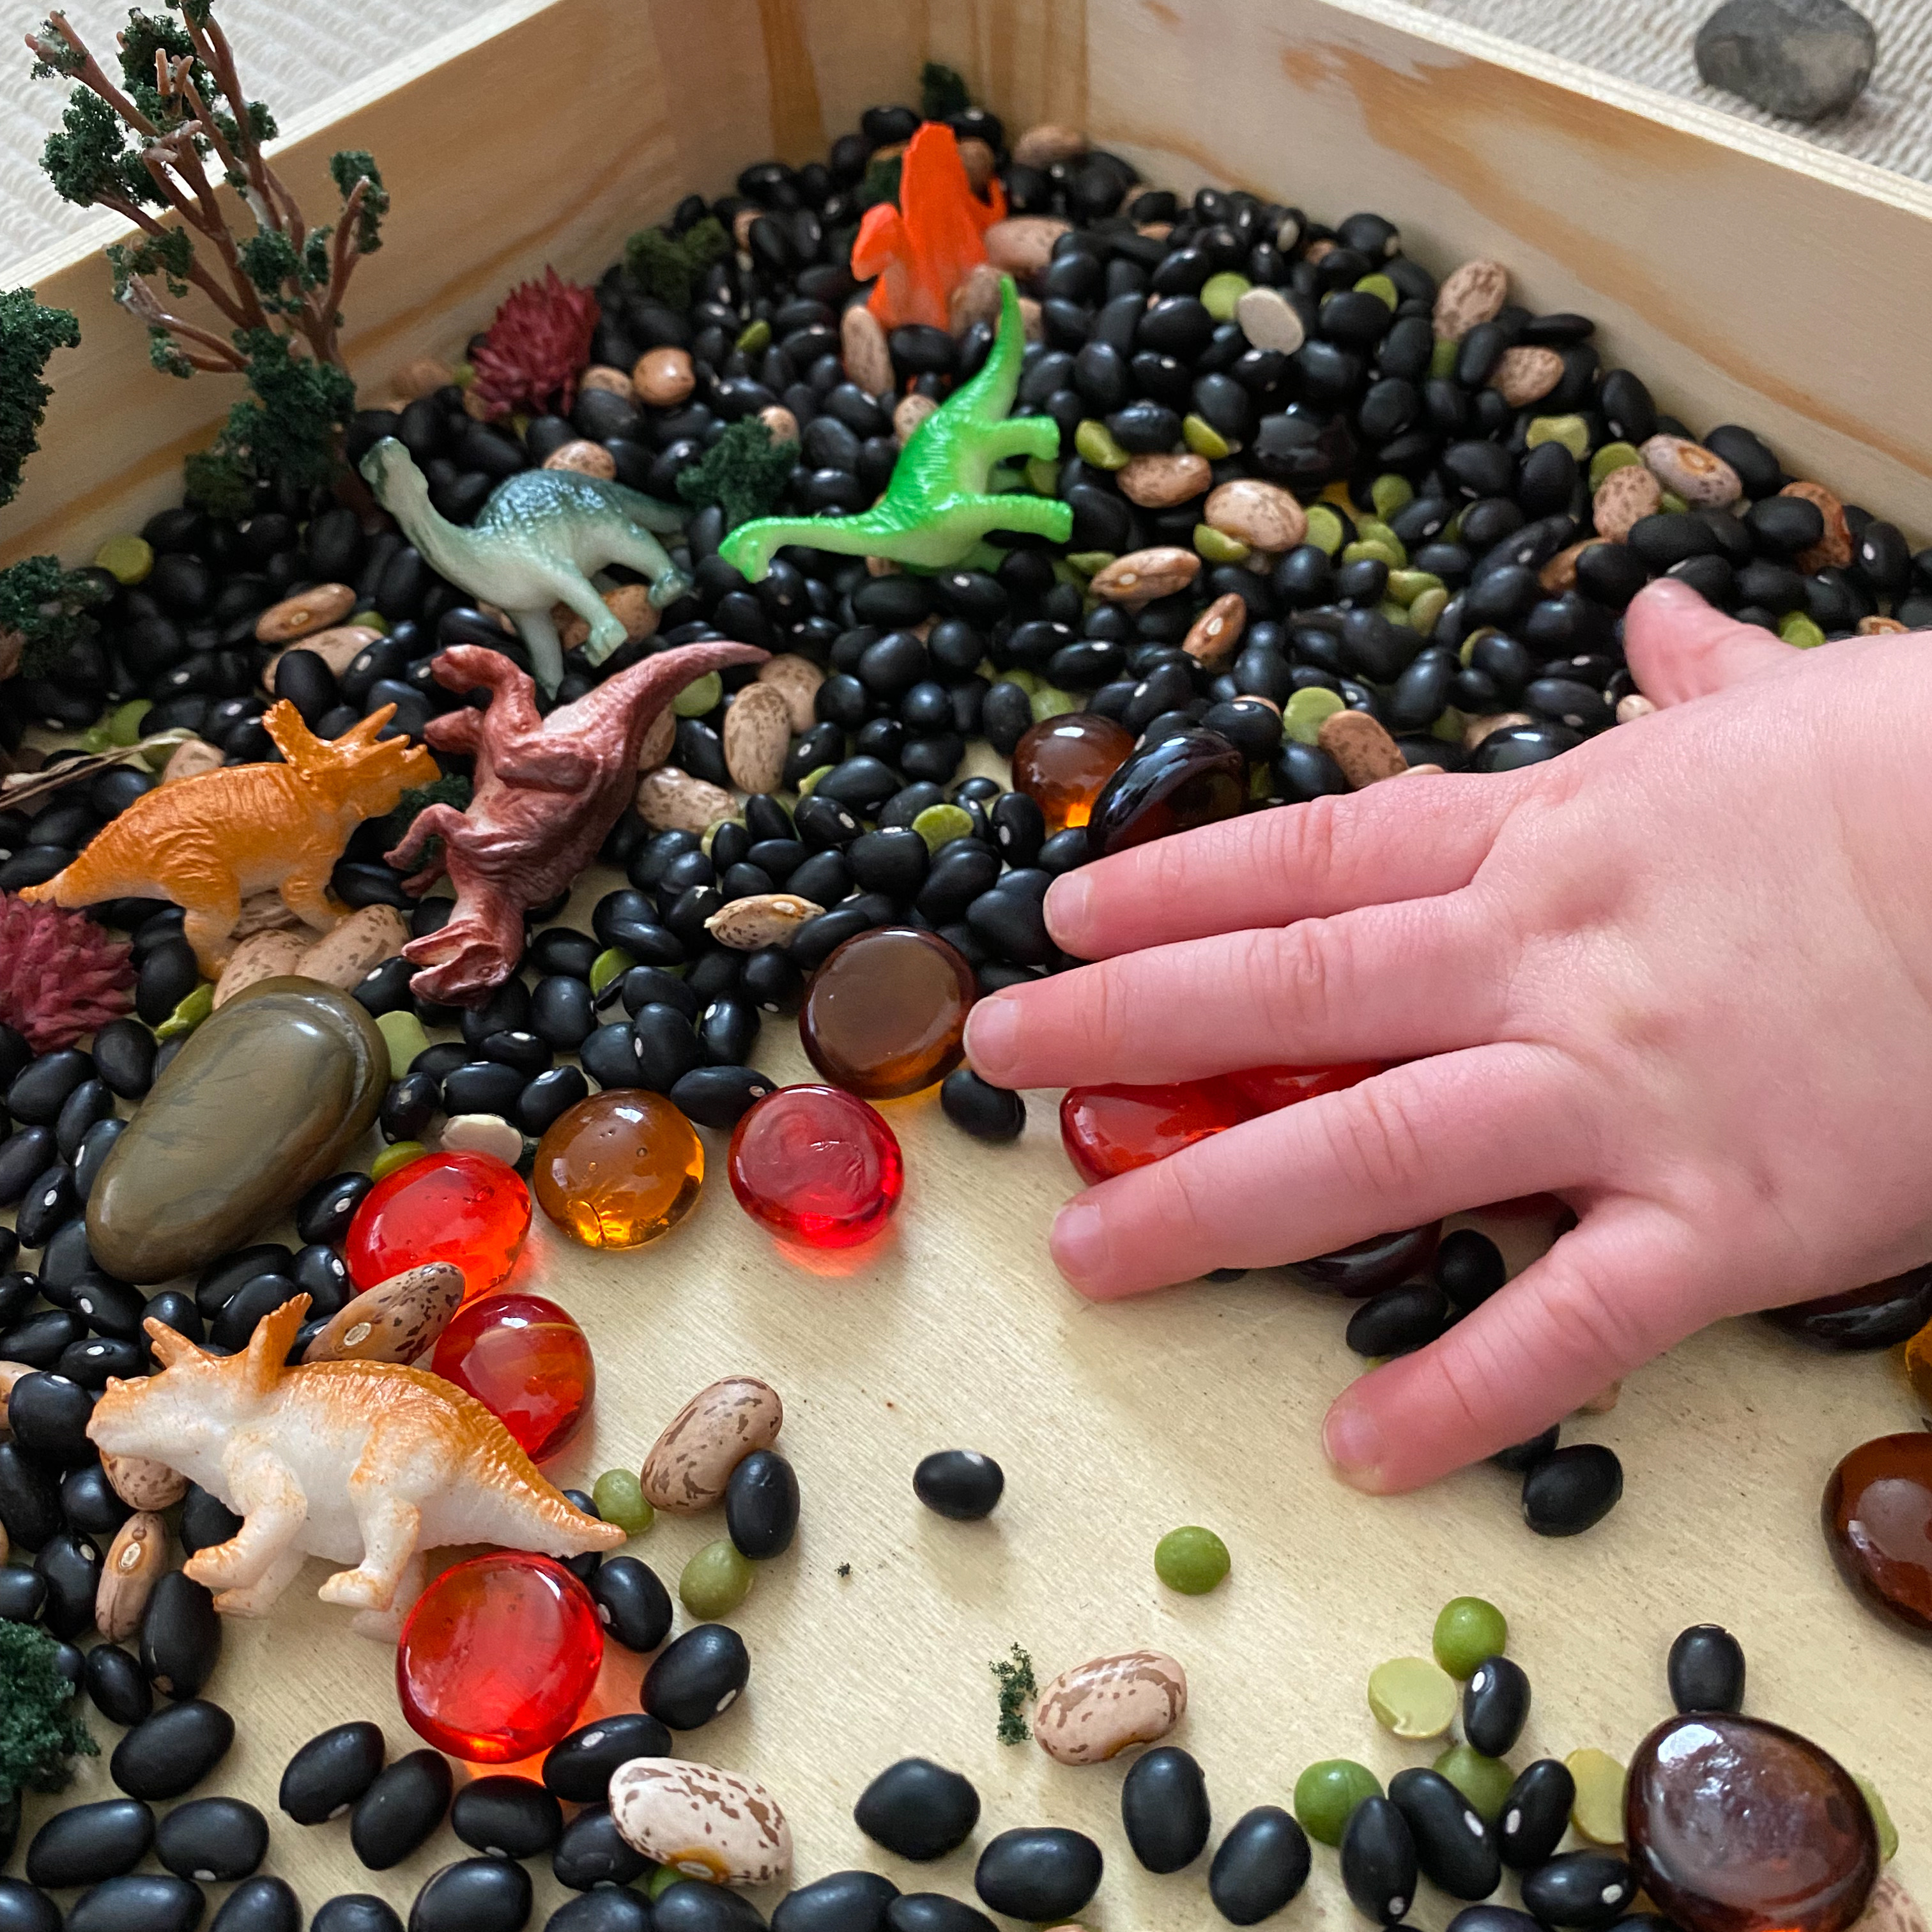 Toddler hand scooping up black beans and red glass beads from the dinosaur bin.